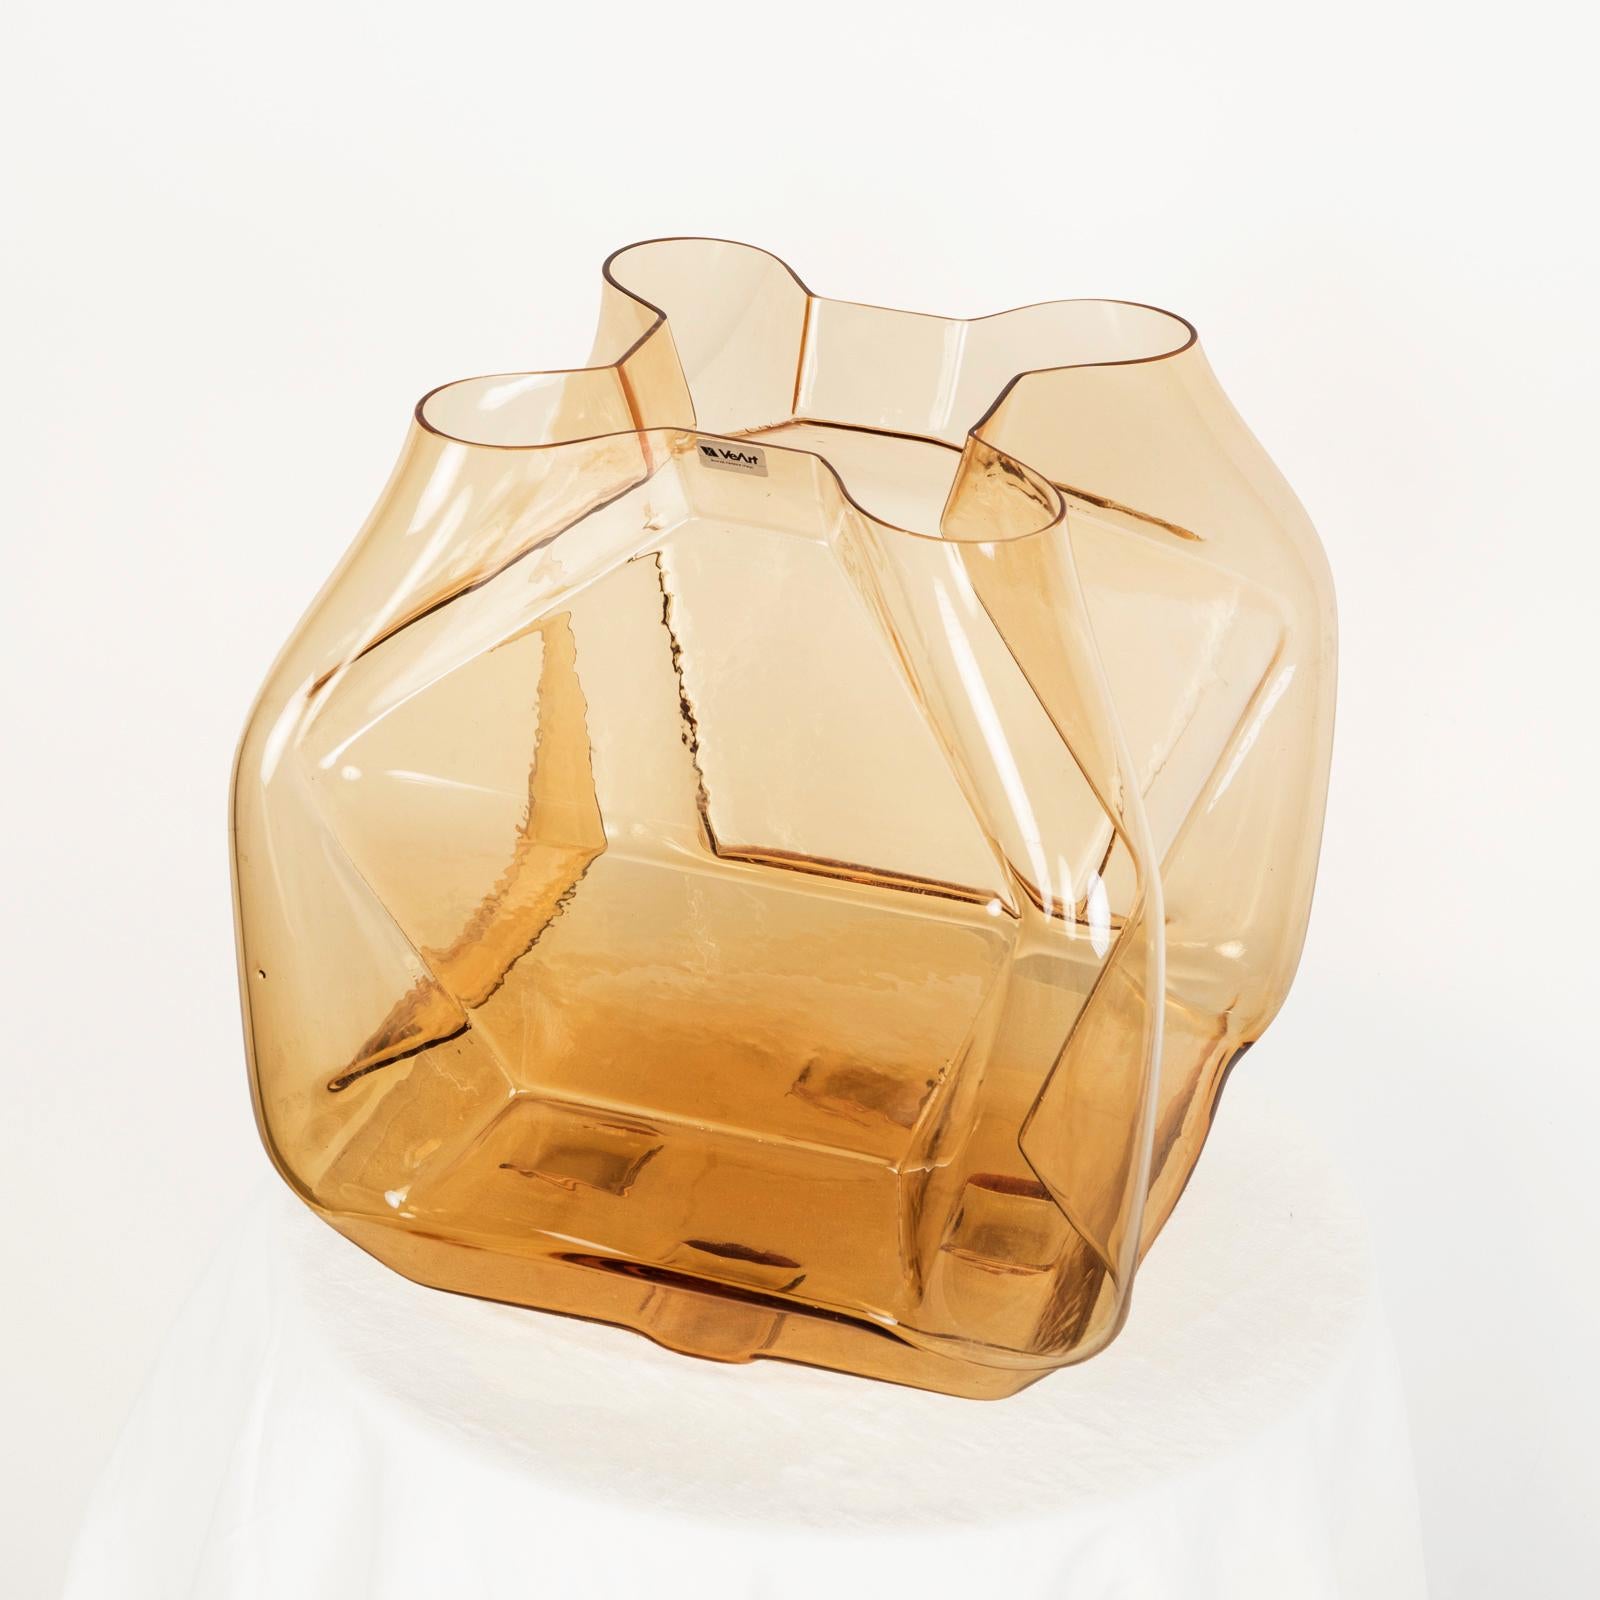 Hand-Crafted Collectible Murano Handblown Glass Vase by Toni Zuccheri for VeArt, 1970s